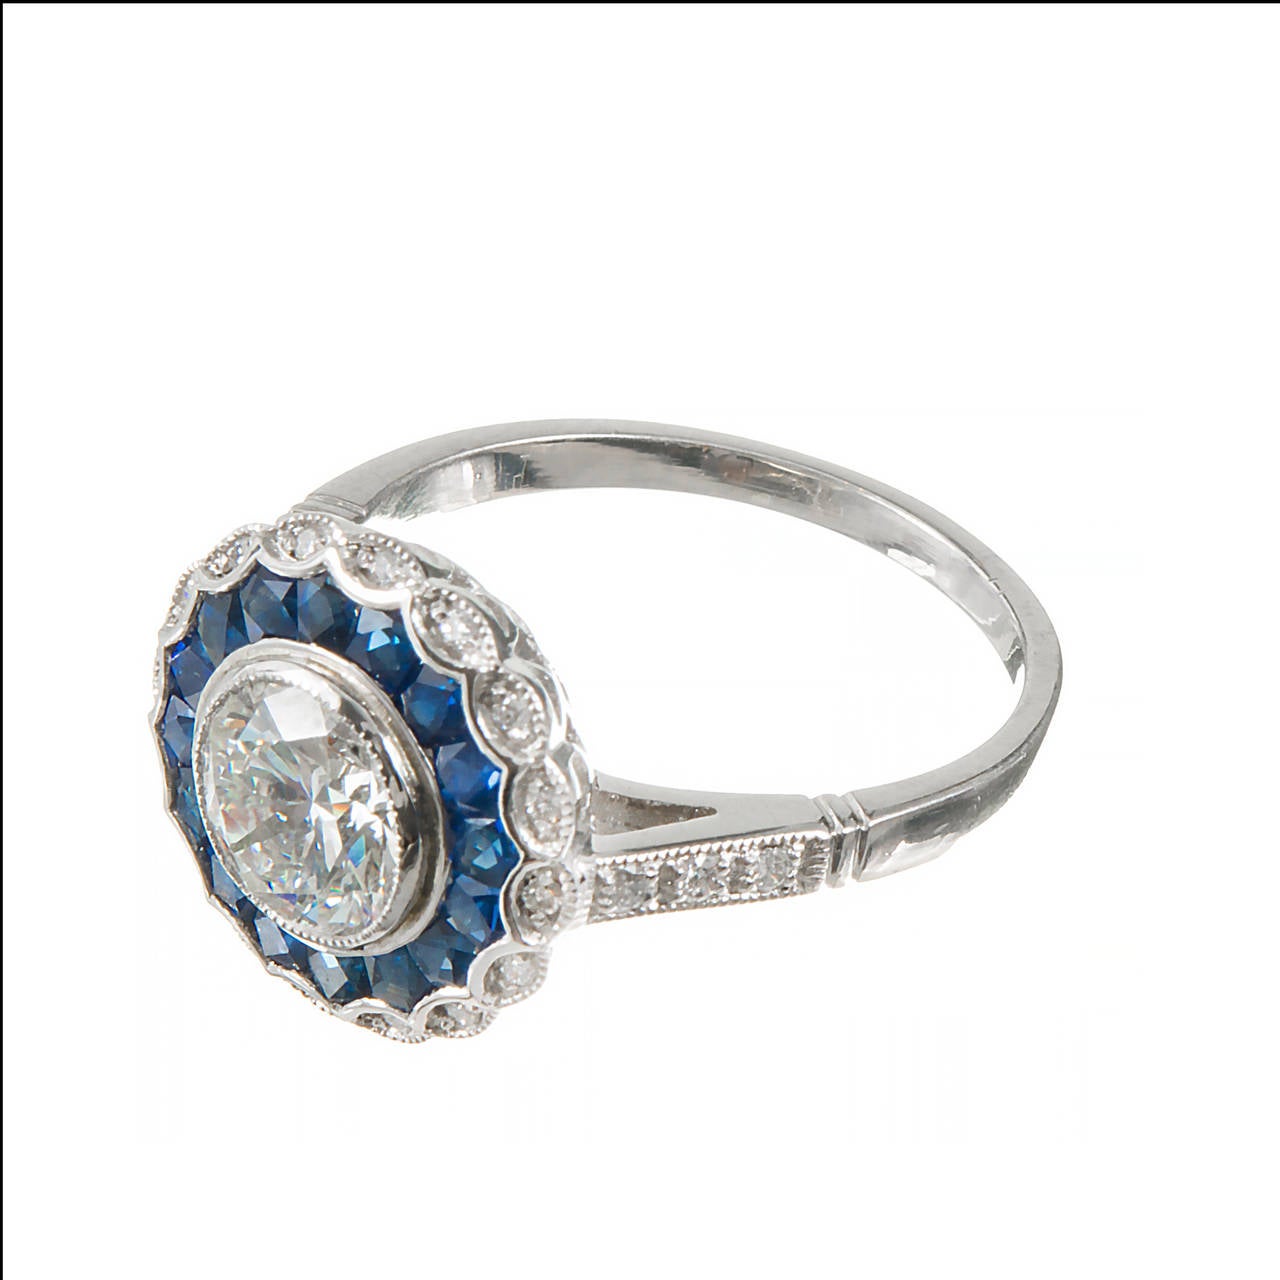 Platinum ring with genuine calibre Sapphires and small old cut diamonds with an early Ideal cut center diamond extra sparkly GIA certified I, VS, 60.6% depth and 61% table.. A real sparkler.

1 round diamond, approx. total weight 1.21cts, I, VS1,